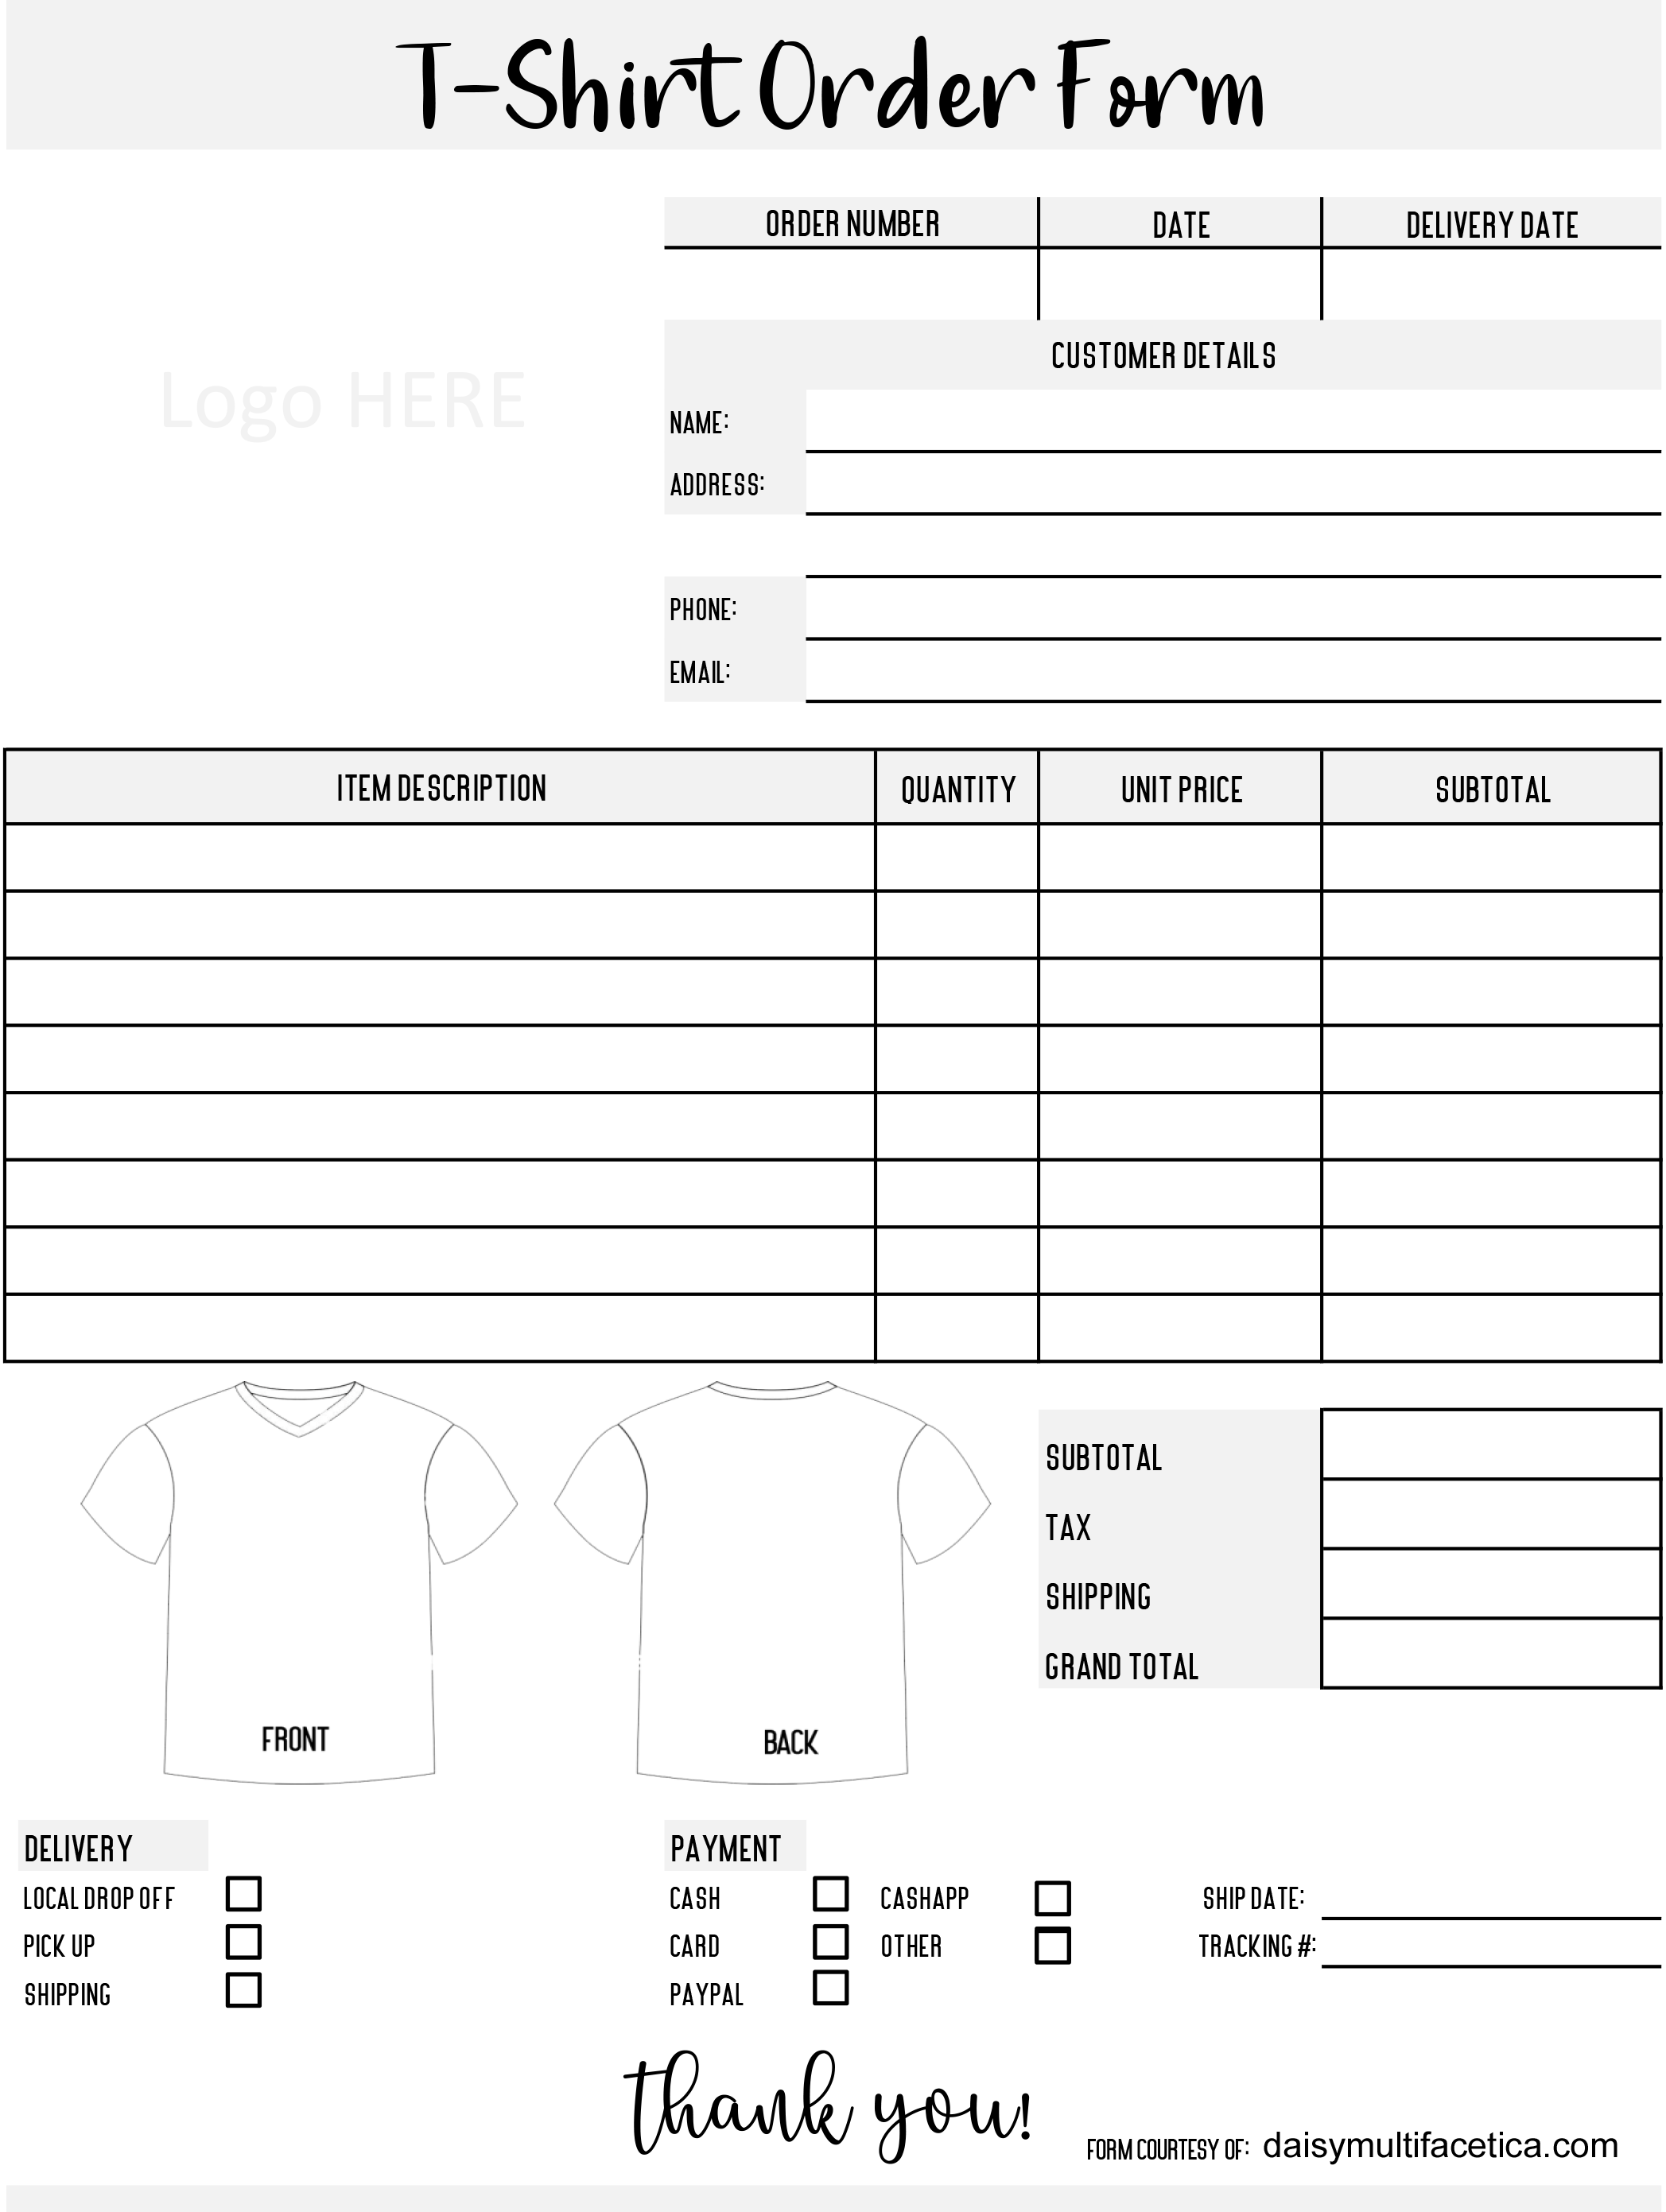 FREE T-Shirt Order Form TEMPLATES in PNG to Customize.